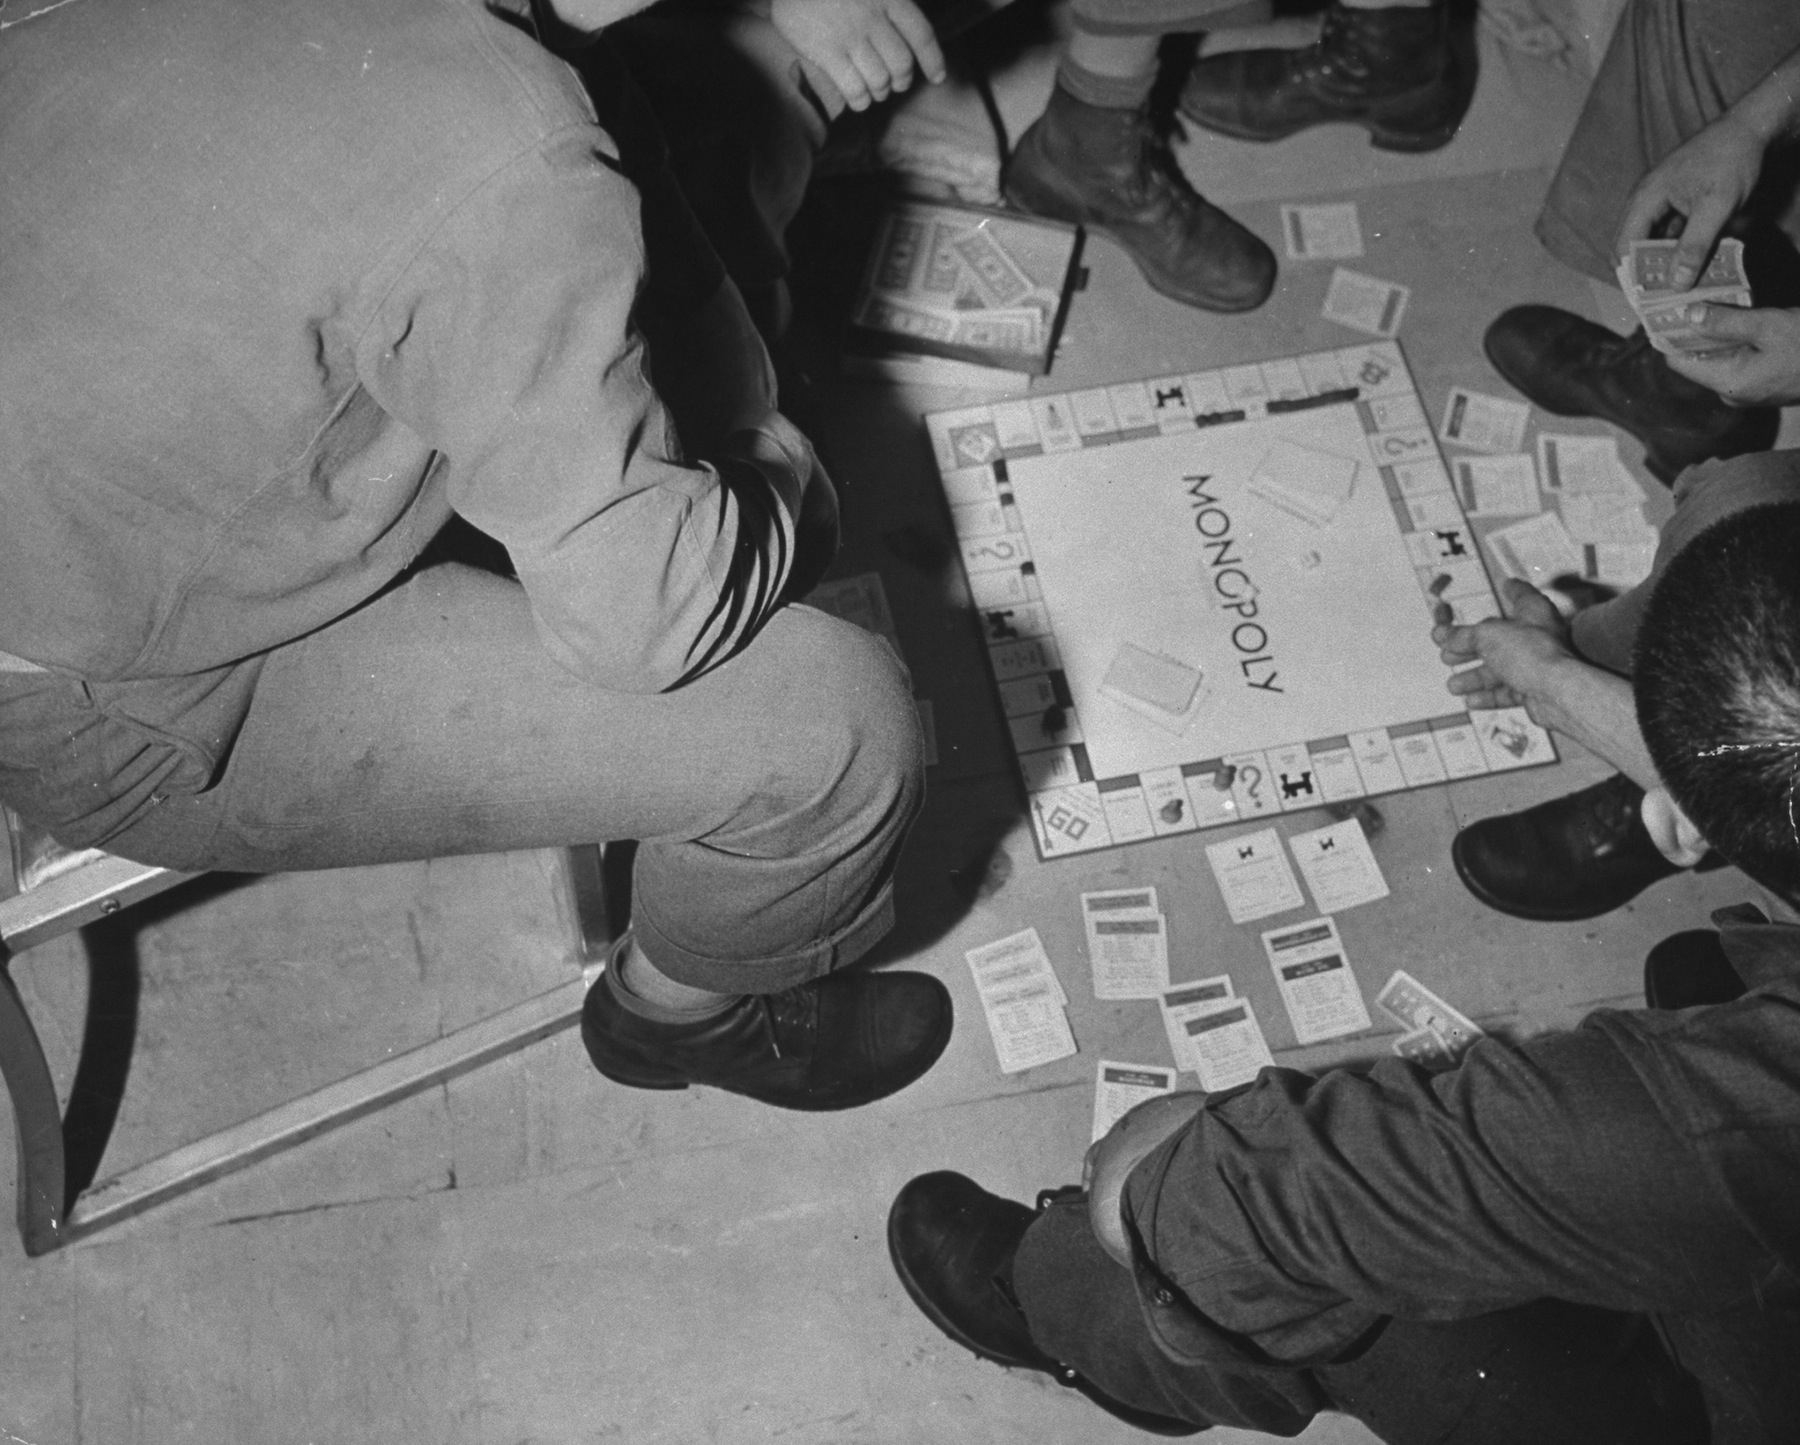 Soldiers playing Monopoly